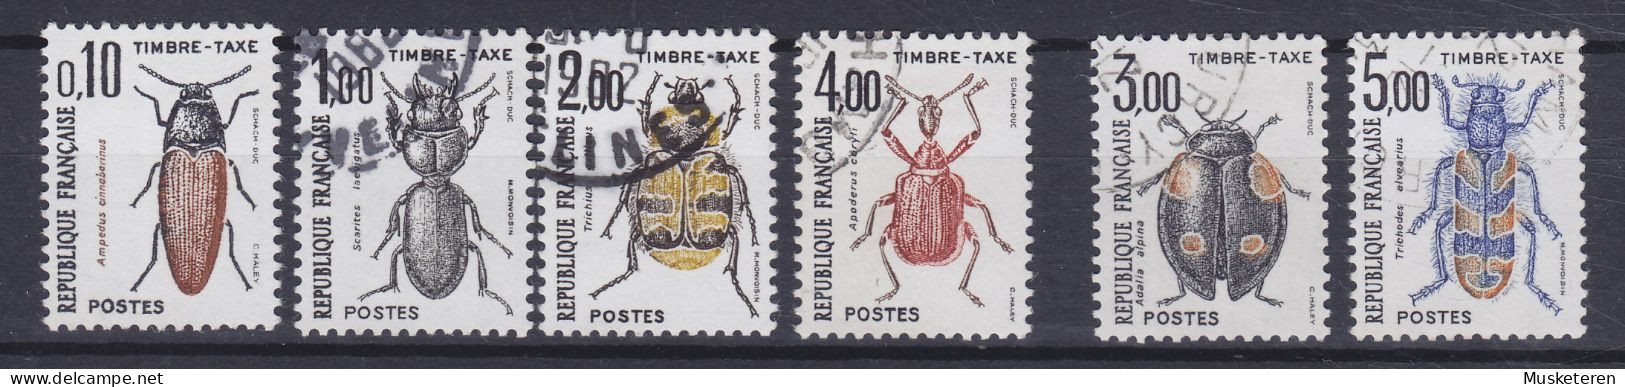 France Taxe Postage Due 1982/83 Mi. 106, 109-11, 114-15 Käfer Beetles Insekten Insects (o) - 1960-.... Used